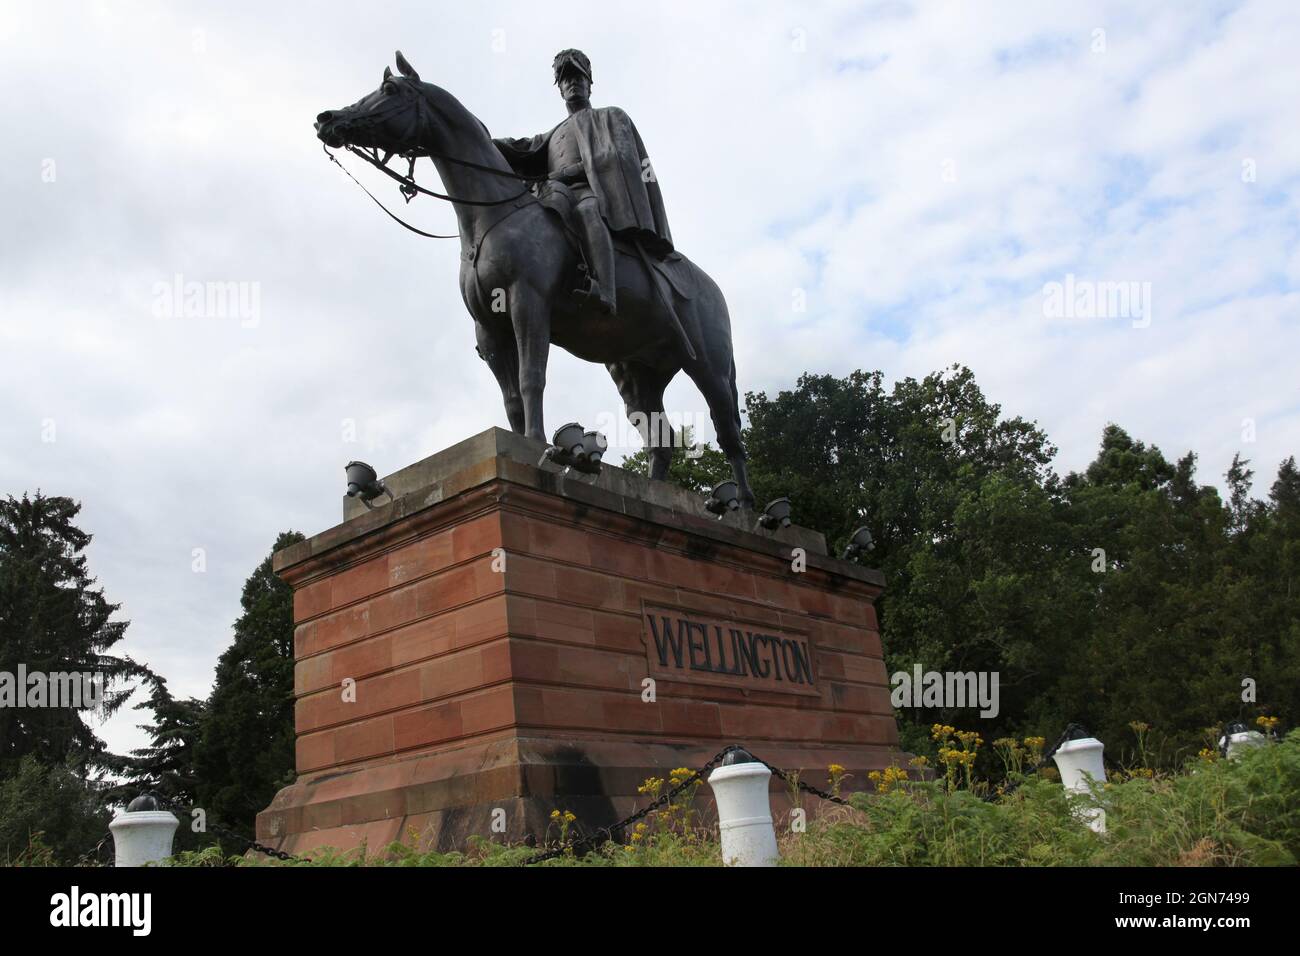 An equestrian statue of The Duke of Wellington found in Aldershot, Hampshire, UK, taken July 17th 2018 Stock Photo